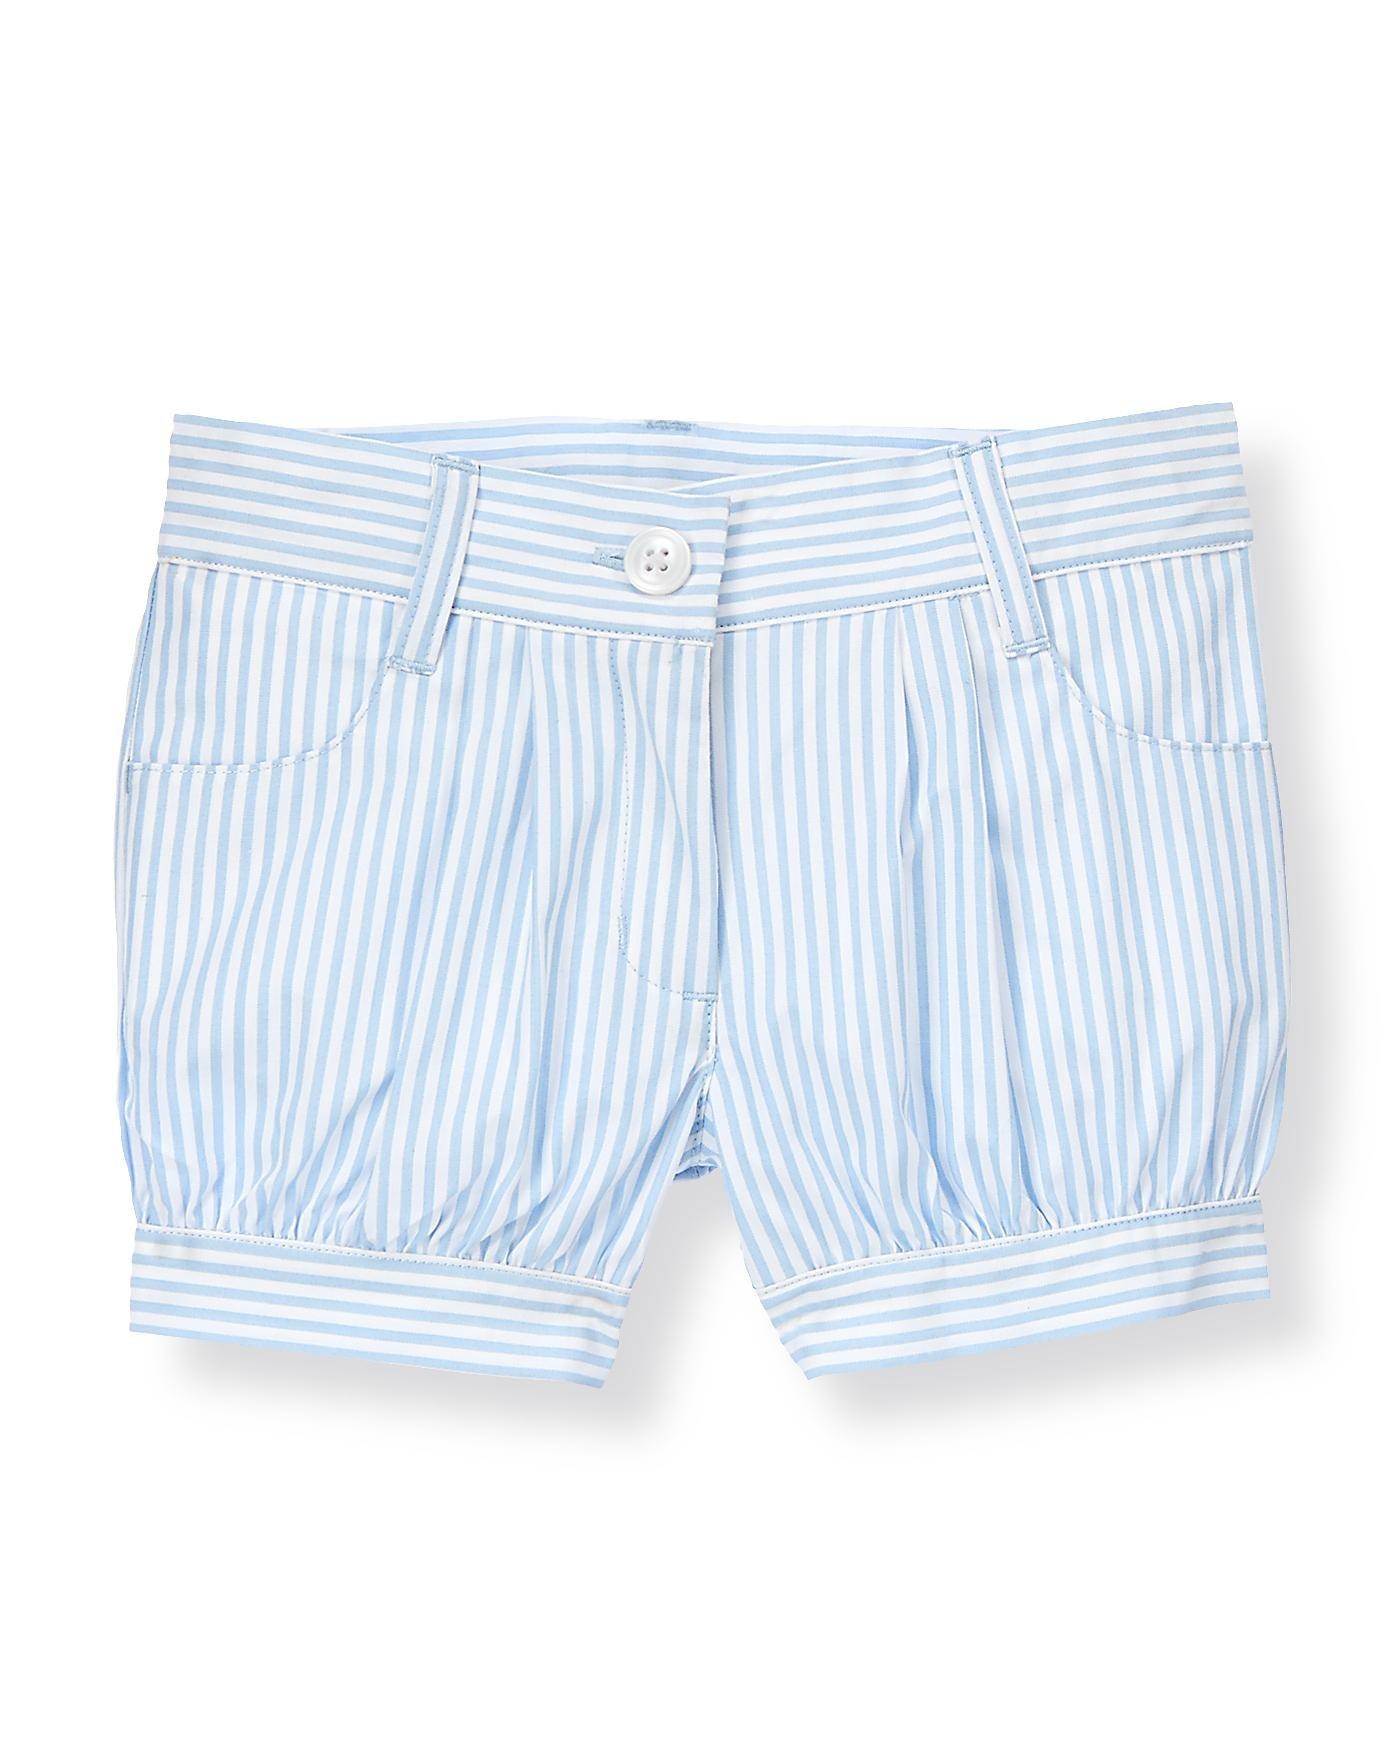 Cuffed Striped Short image number 0